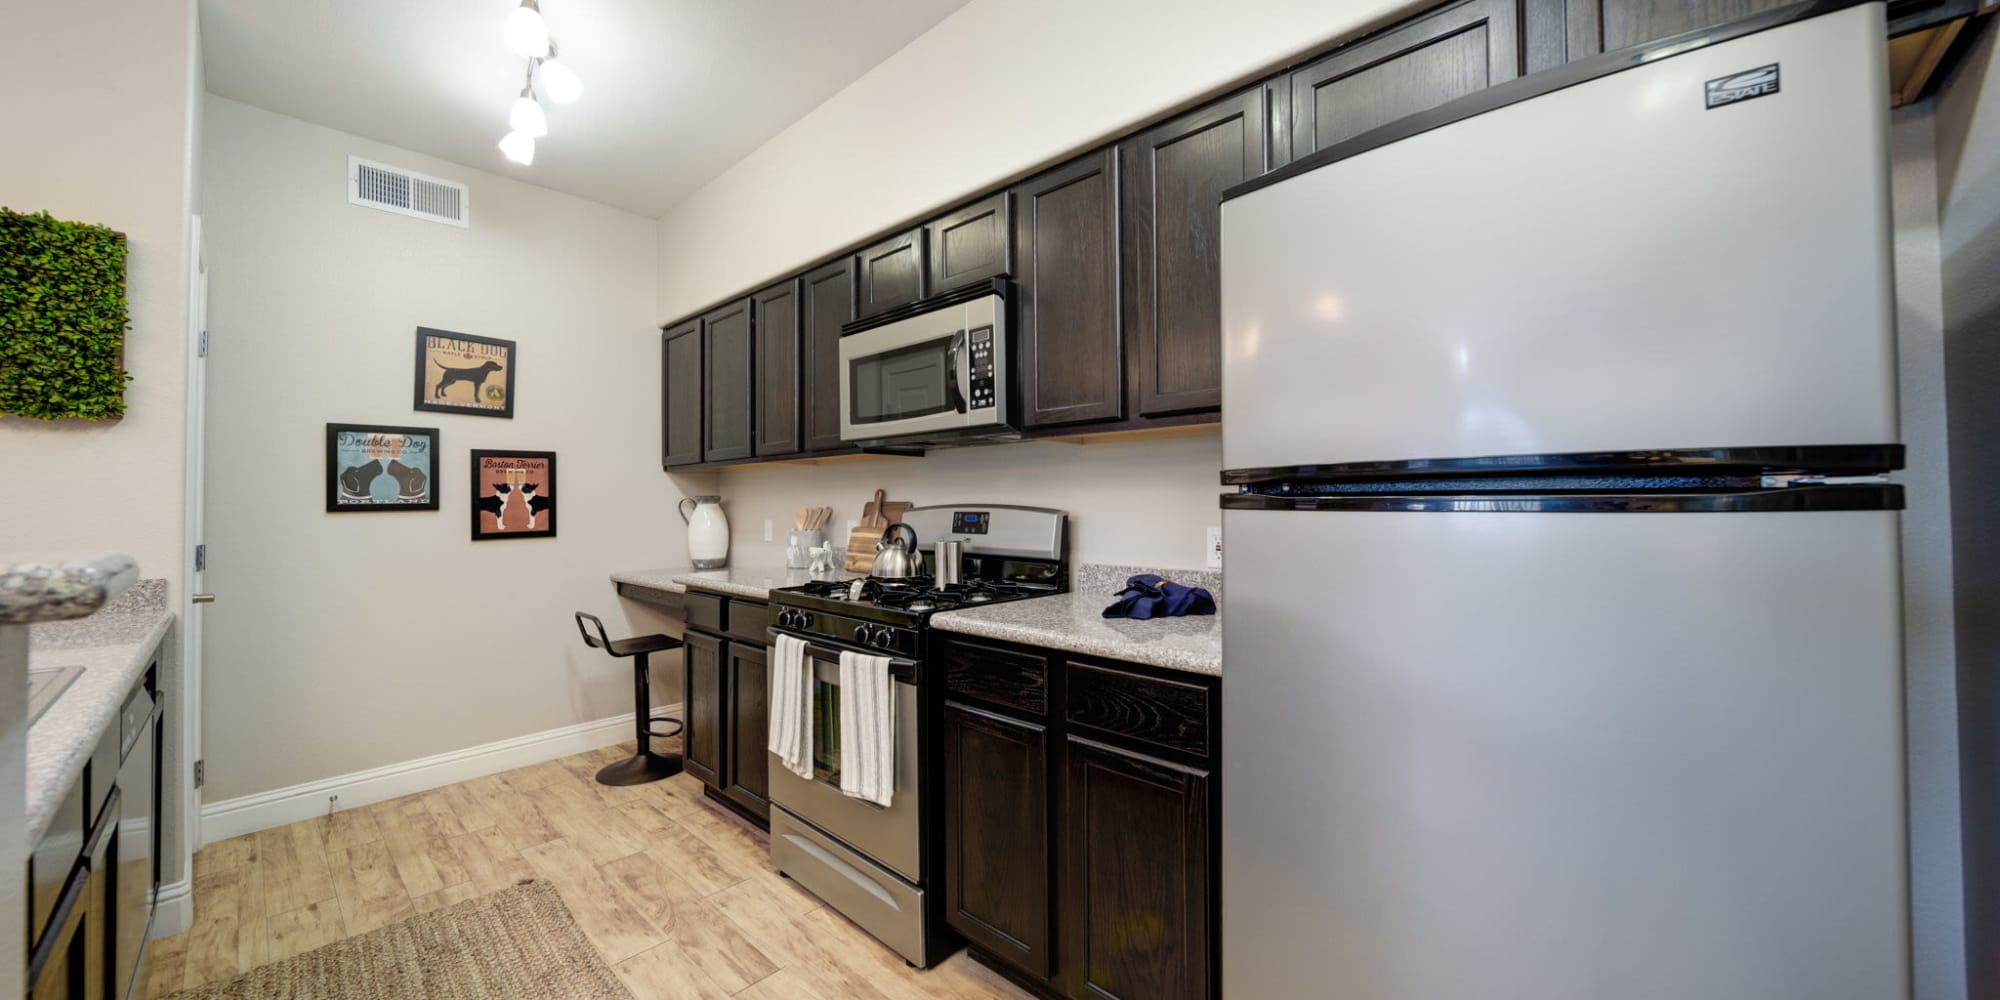 Large kitchen at The Trails at Pioneer Meadows in Sparks, Nevada